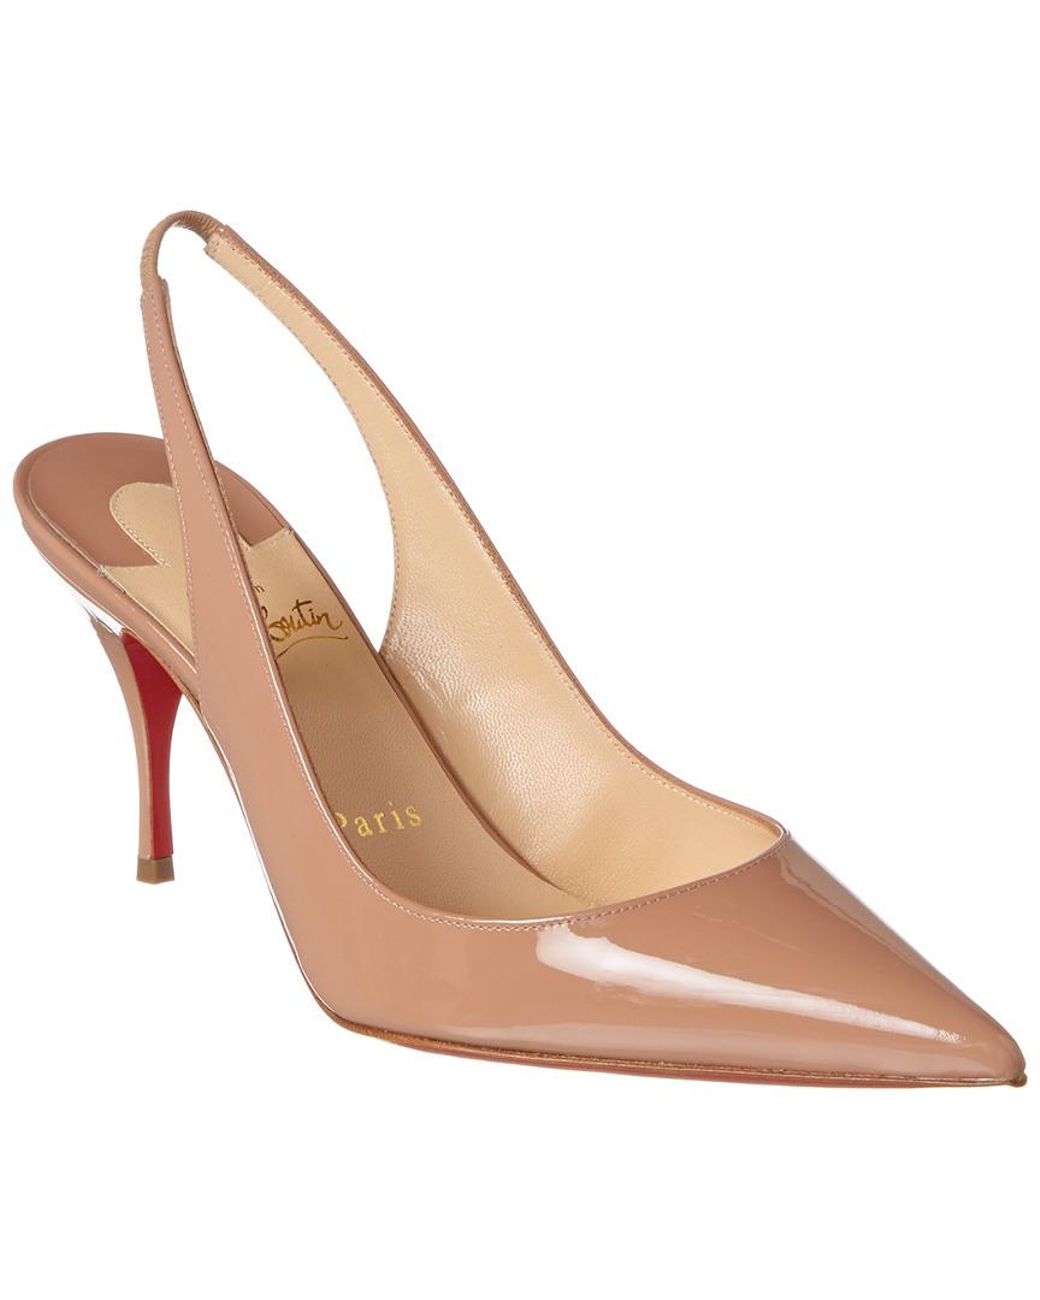 Christian Louboutin Clare 80 Patent Slingback Pump | Lyst